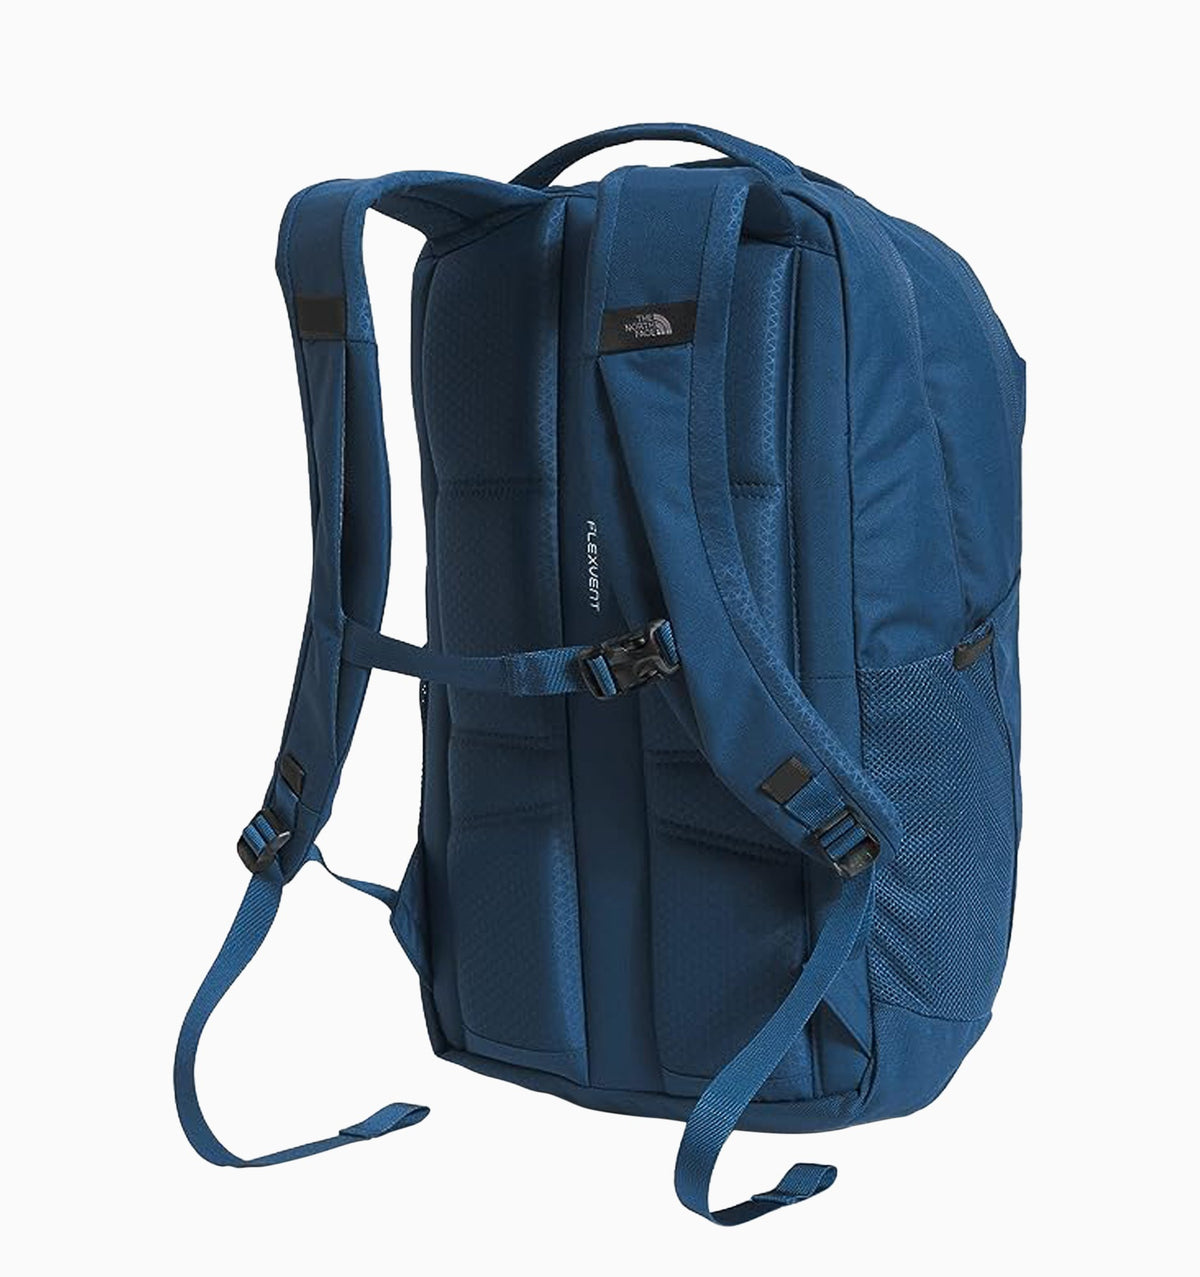 The North Face 15" Vault Laptop Backpack 27L